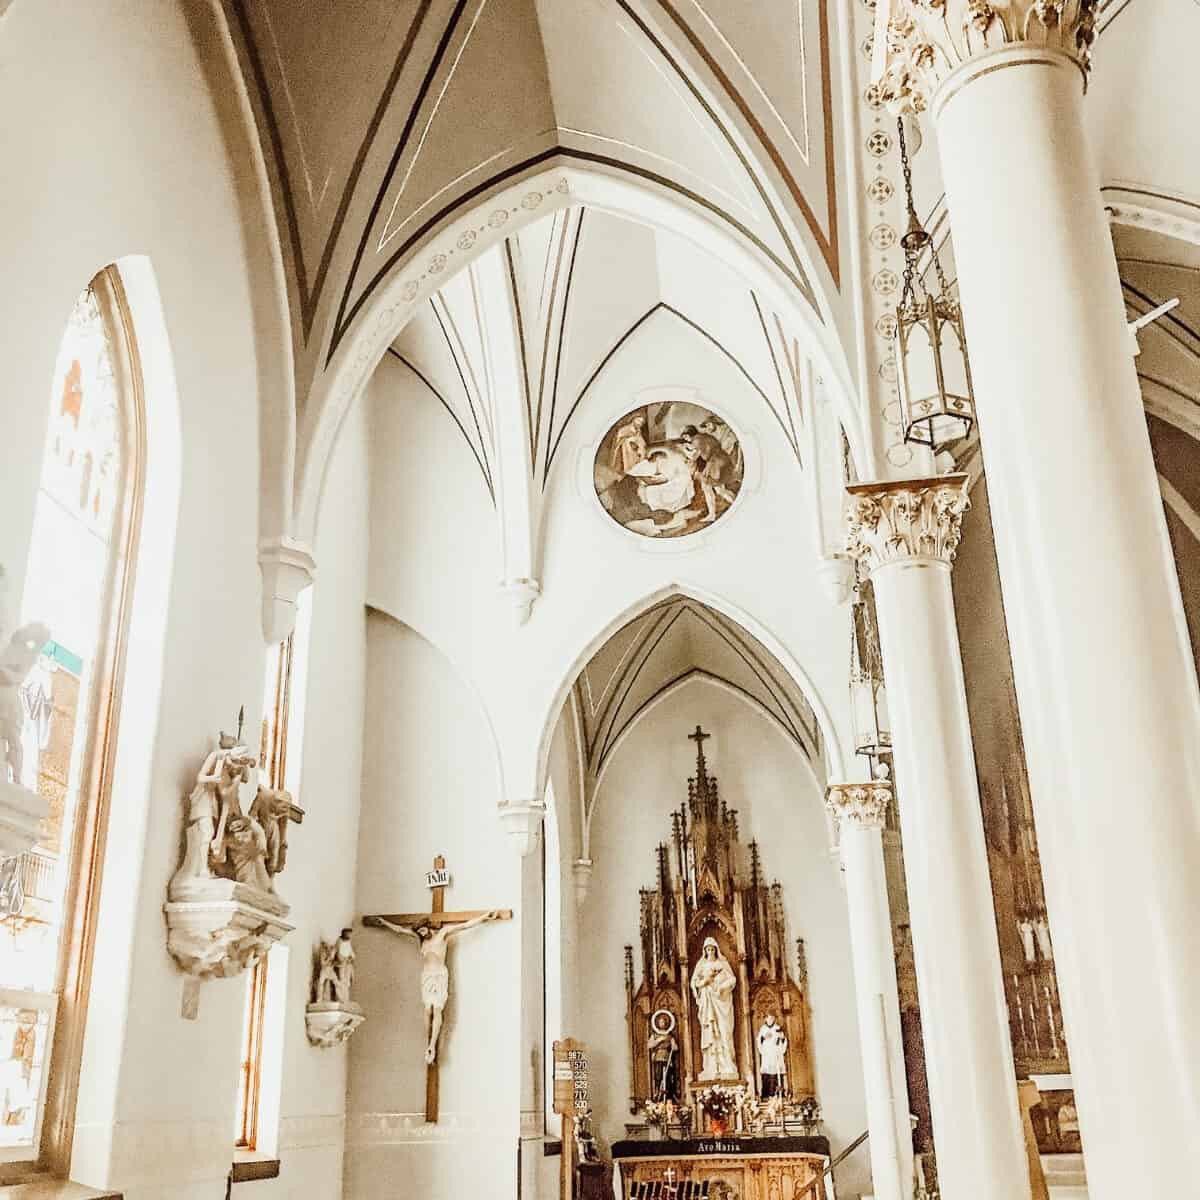 view of a side altar in a Catholic Church